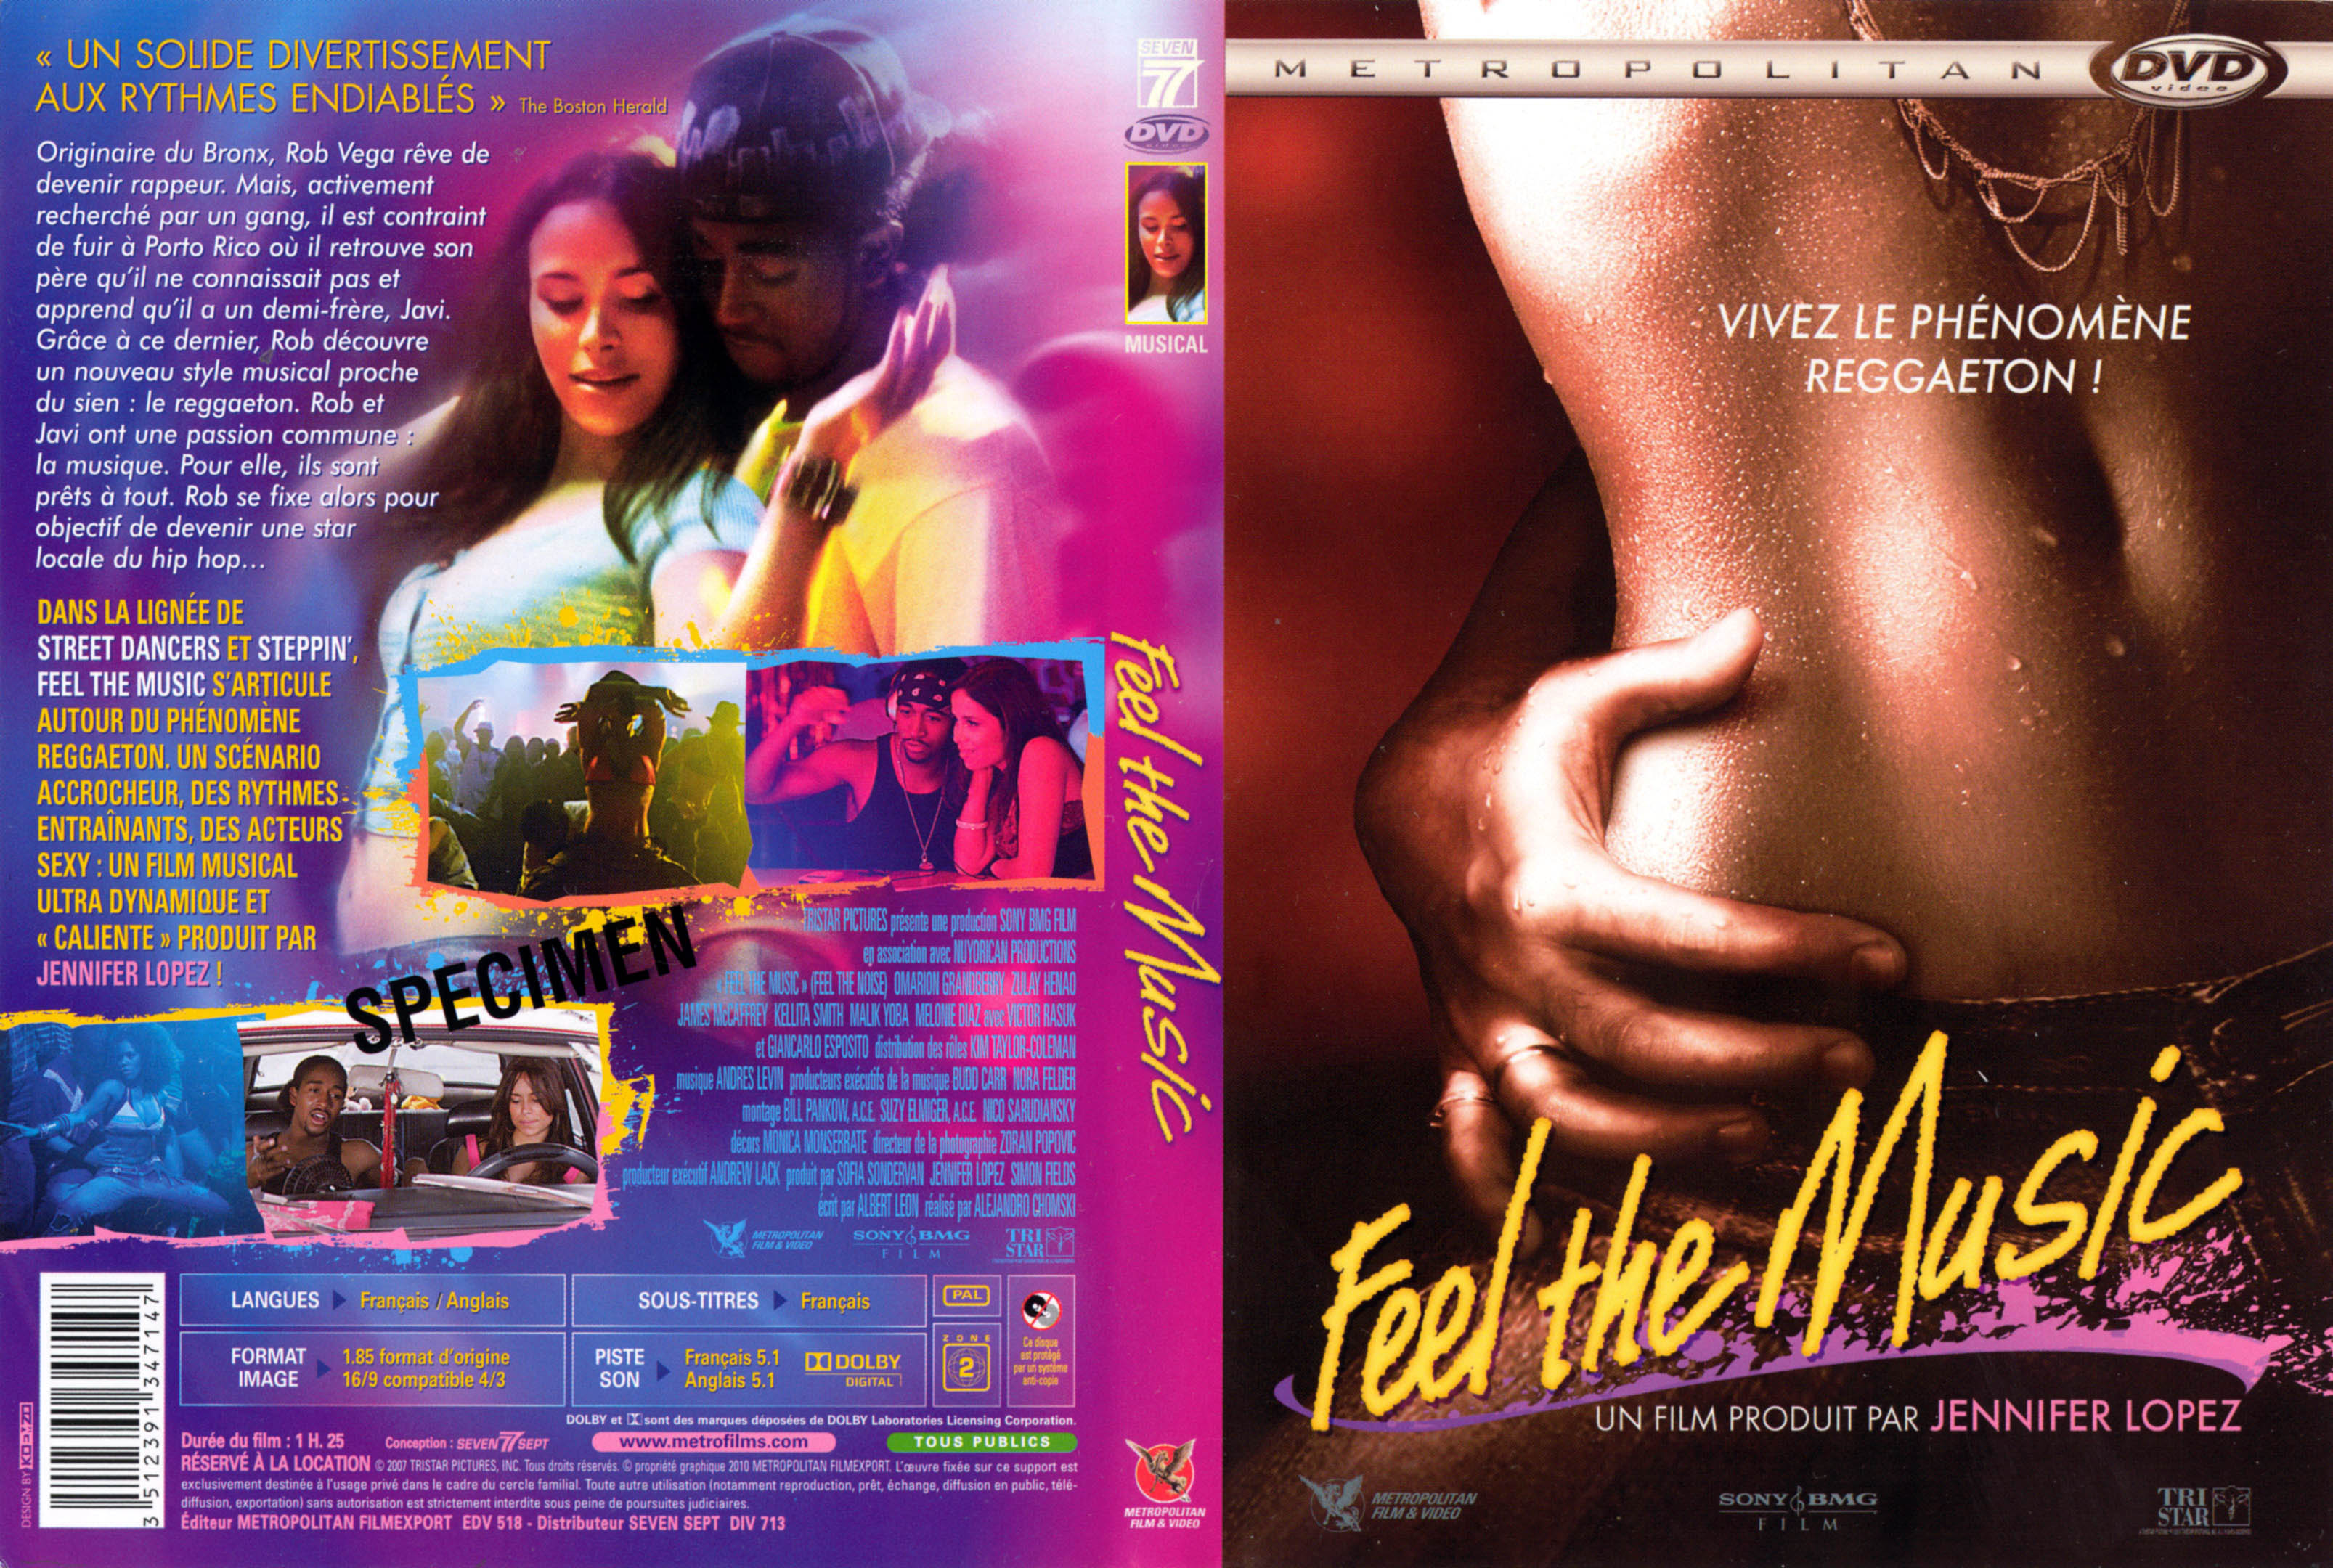 Jaquette DVD Feel the music